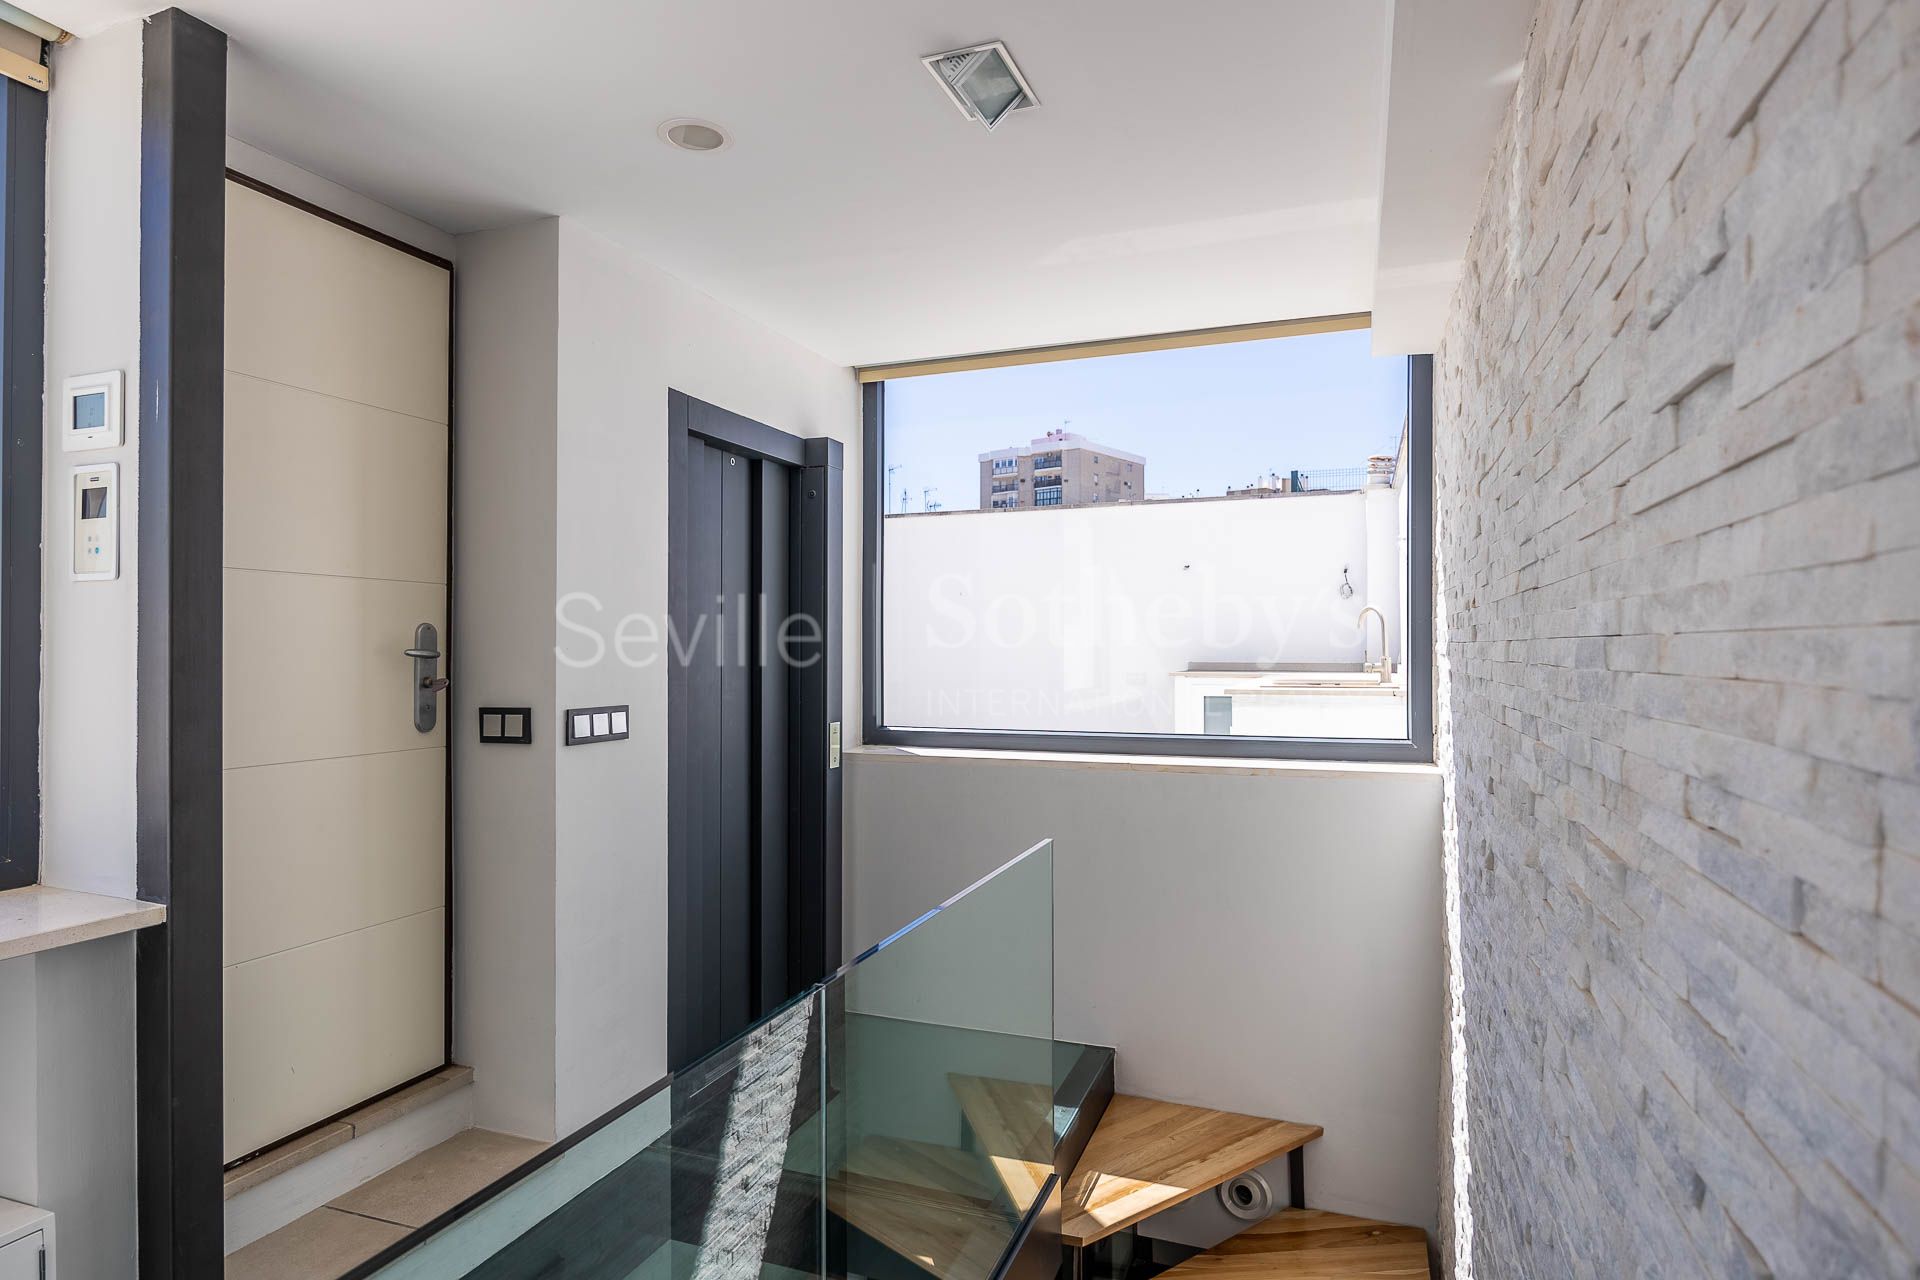 Exclusive house with pool situated in one of the most exclusive areas of Nervion